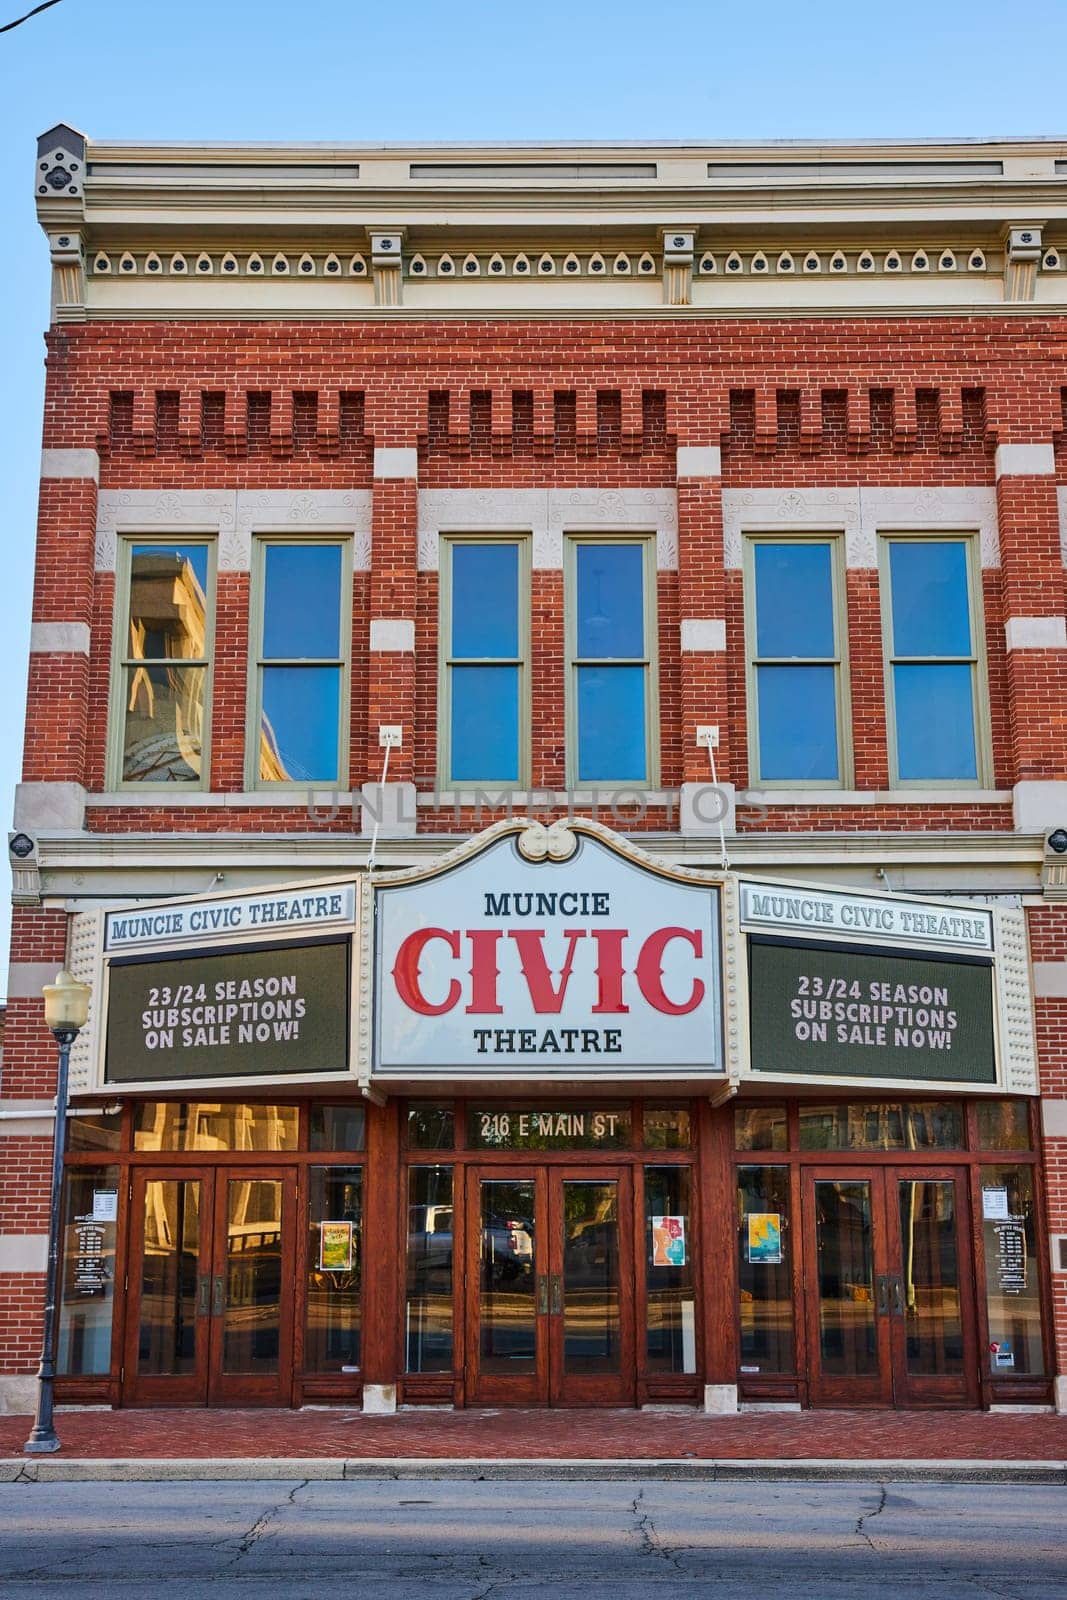 Muncie Civic Theatre Facade with Season Marquee, Indiana by njproductions